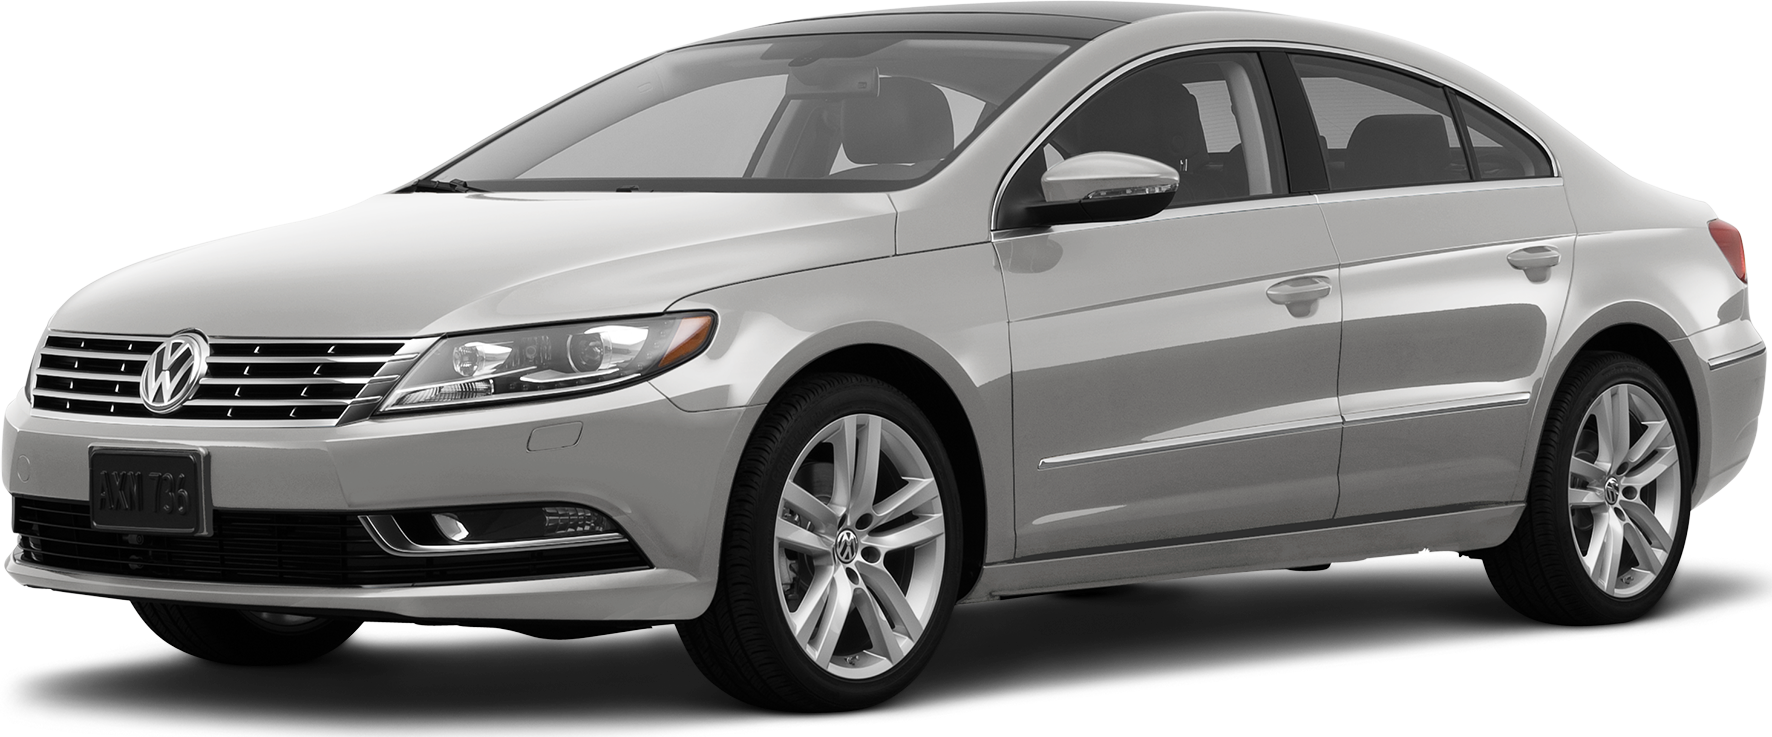 2013 Volkswagen CC Price, Value, Ratings & Reviews